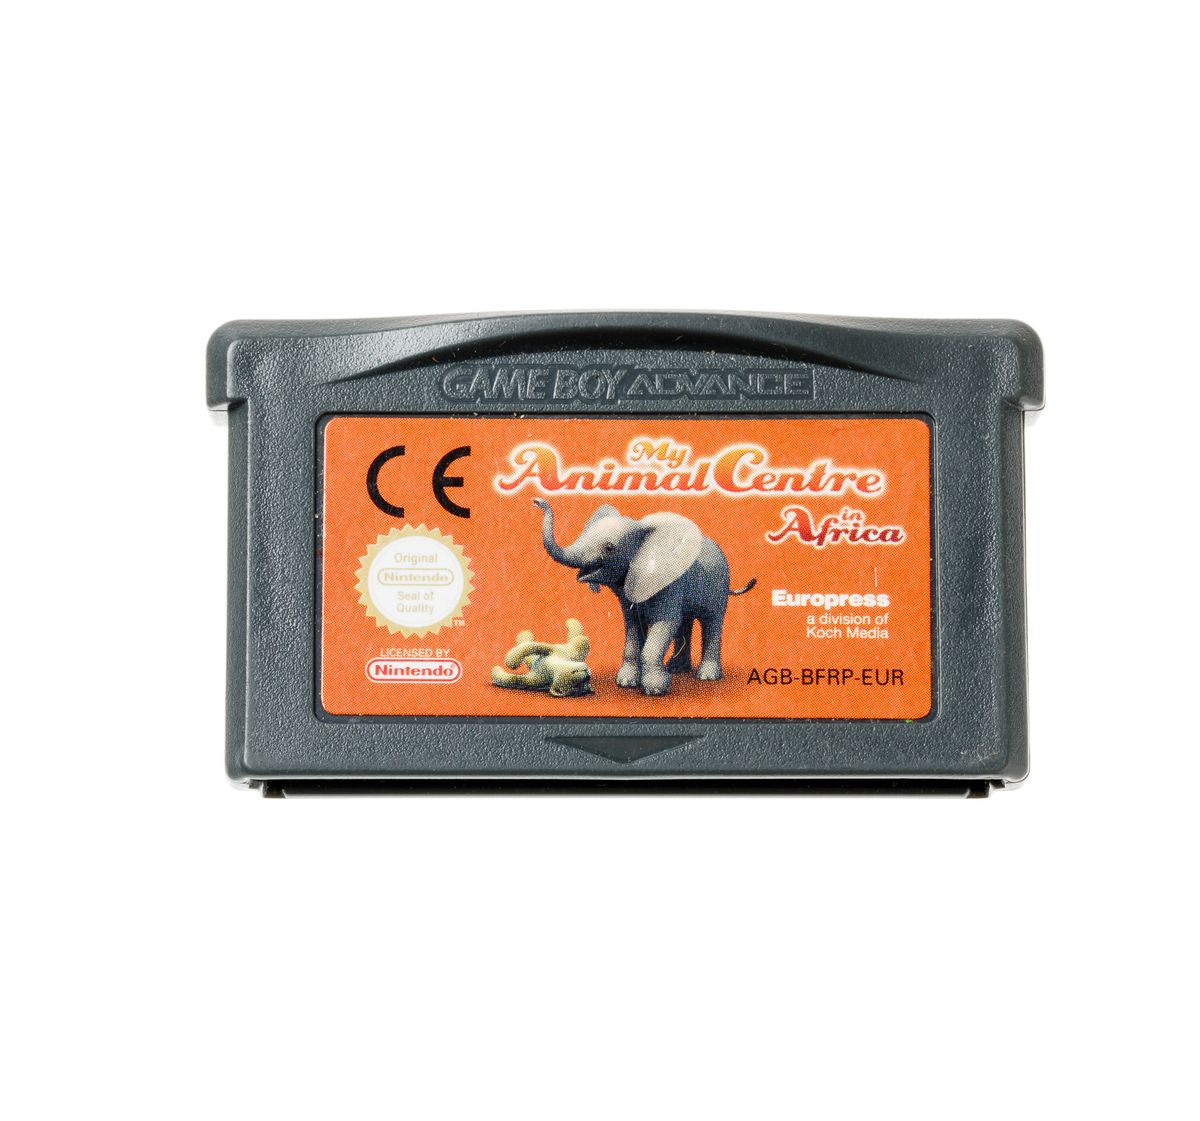 My Animal Centre in Africa - Gameboy Advance Games